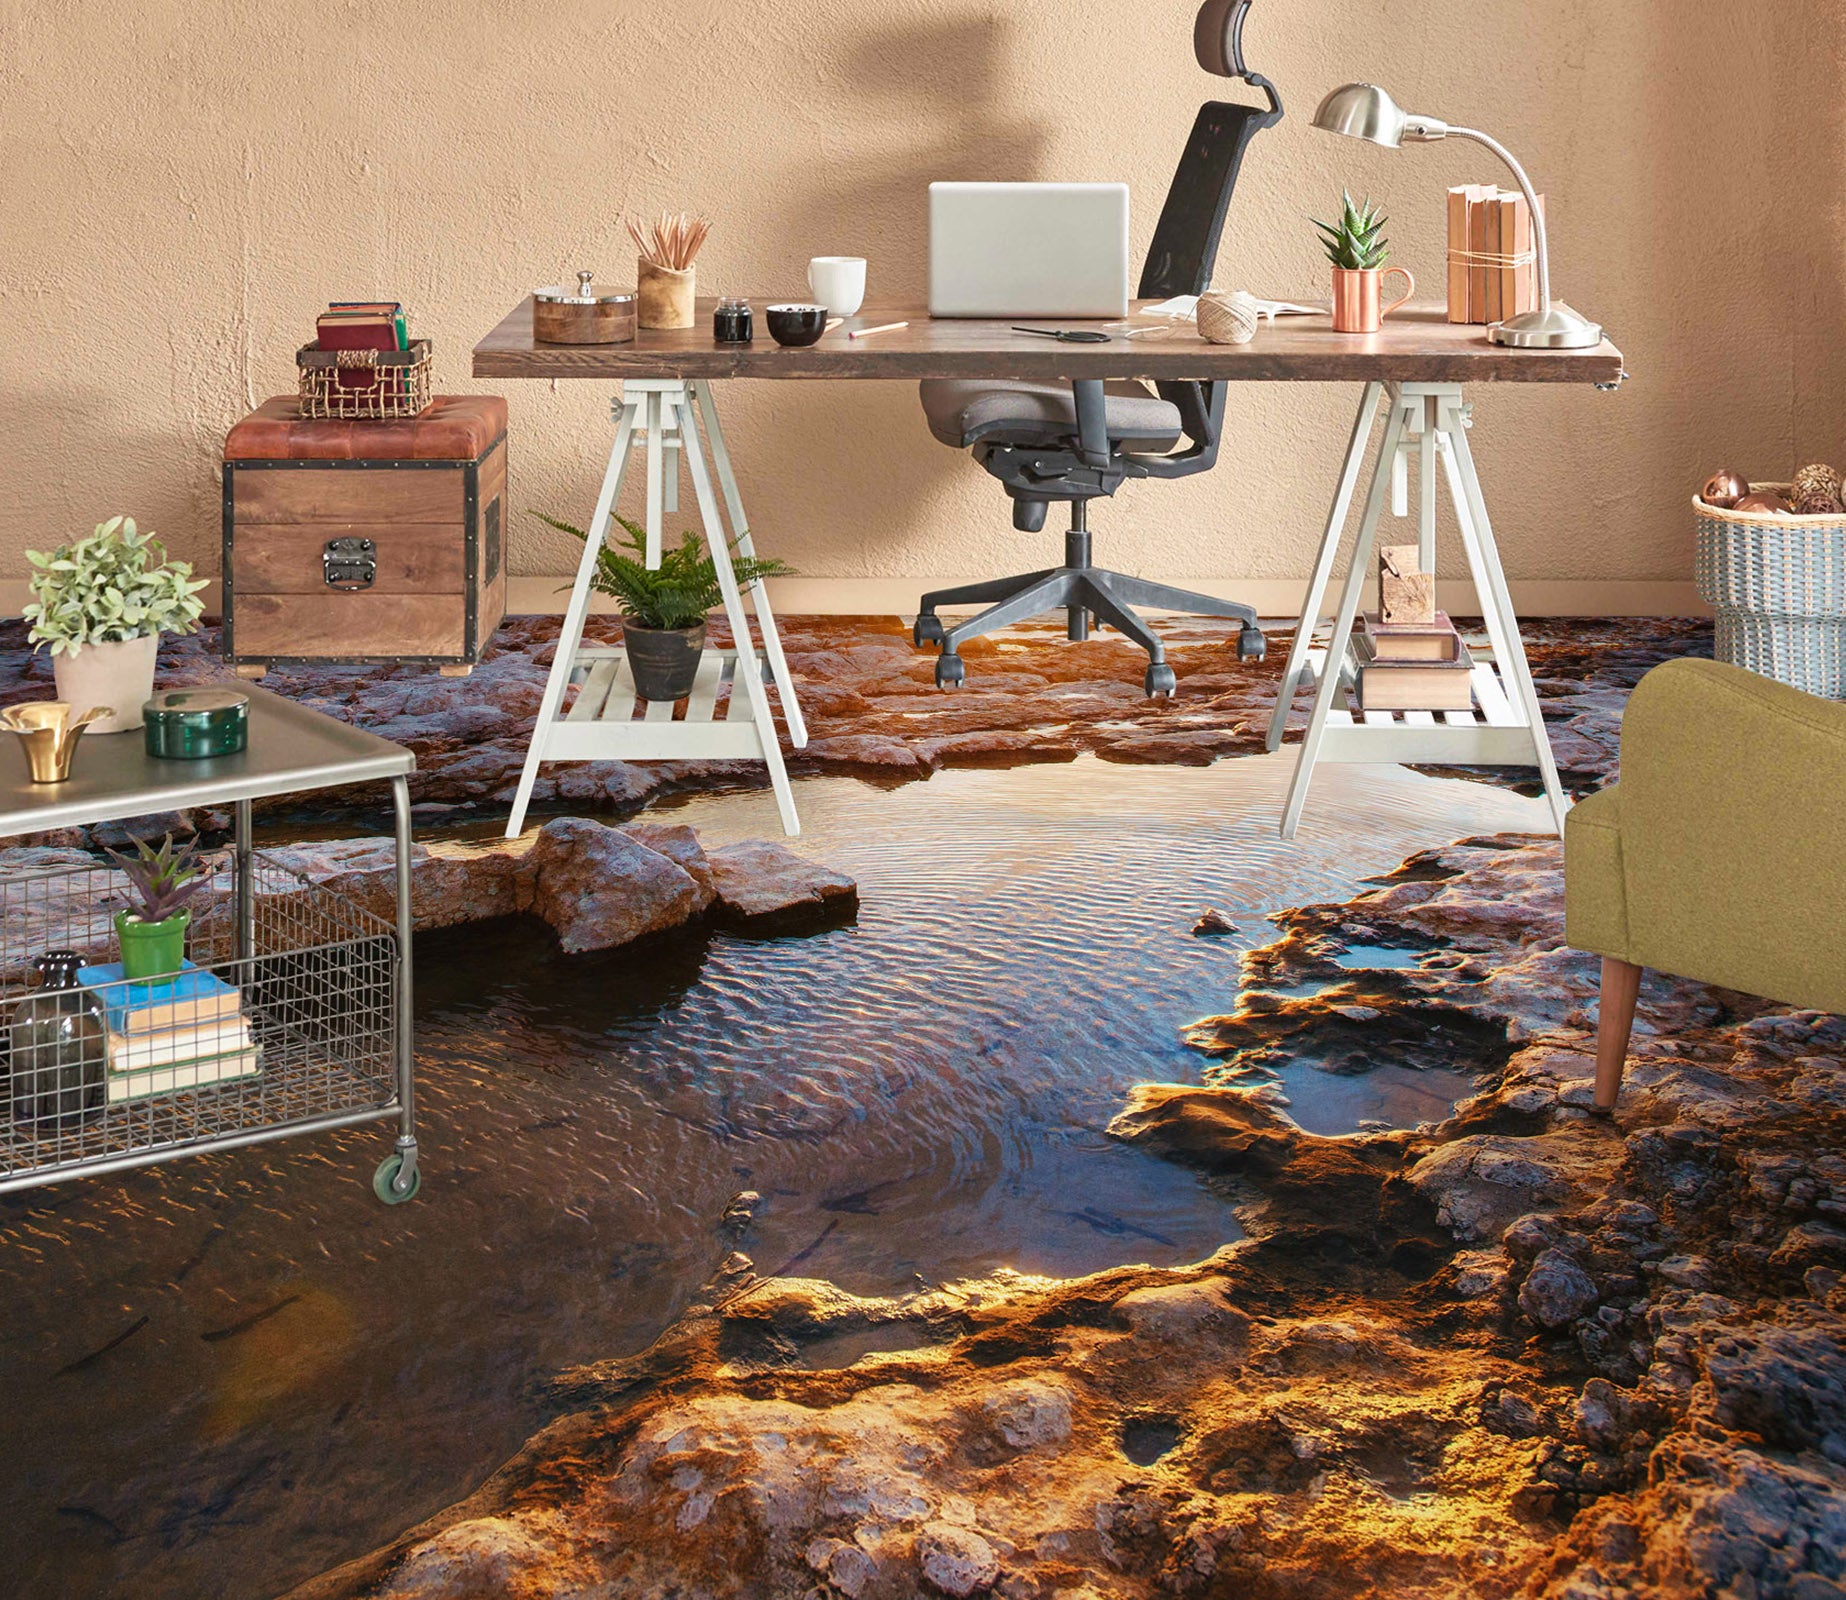 3D Calm Water Surface 1286 Floor Mural  Wallpaper Murals Self-Adhesive Removable Print Epoxy